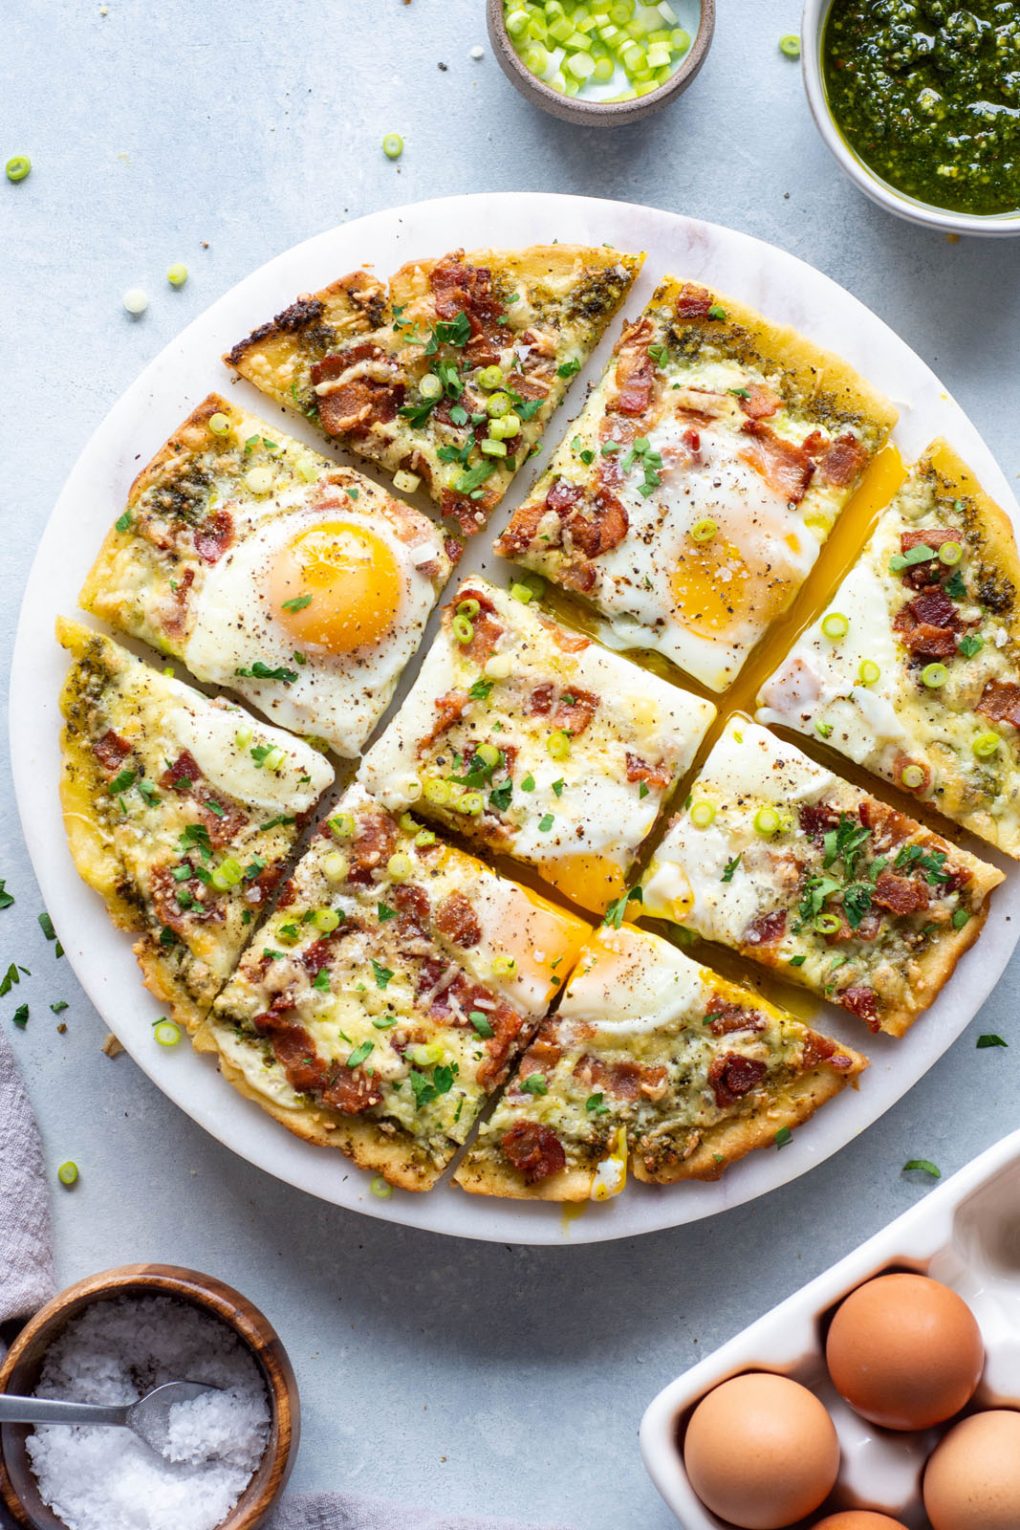 Overhead shot of a breakfast pizza cut into 9 squares. Topped with melted cheese, crispy bacon, sunny side up eggs, and fresh herbs and green onions. On a light colored marble serving tray and a light background. Next to a small bowl of sliced green onions, and another small bowl of pesto. 